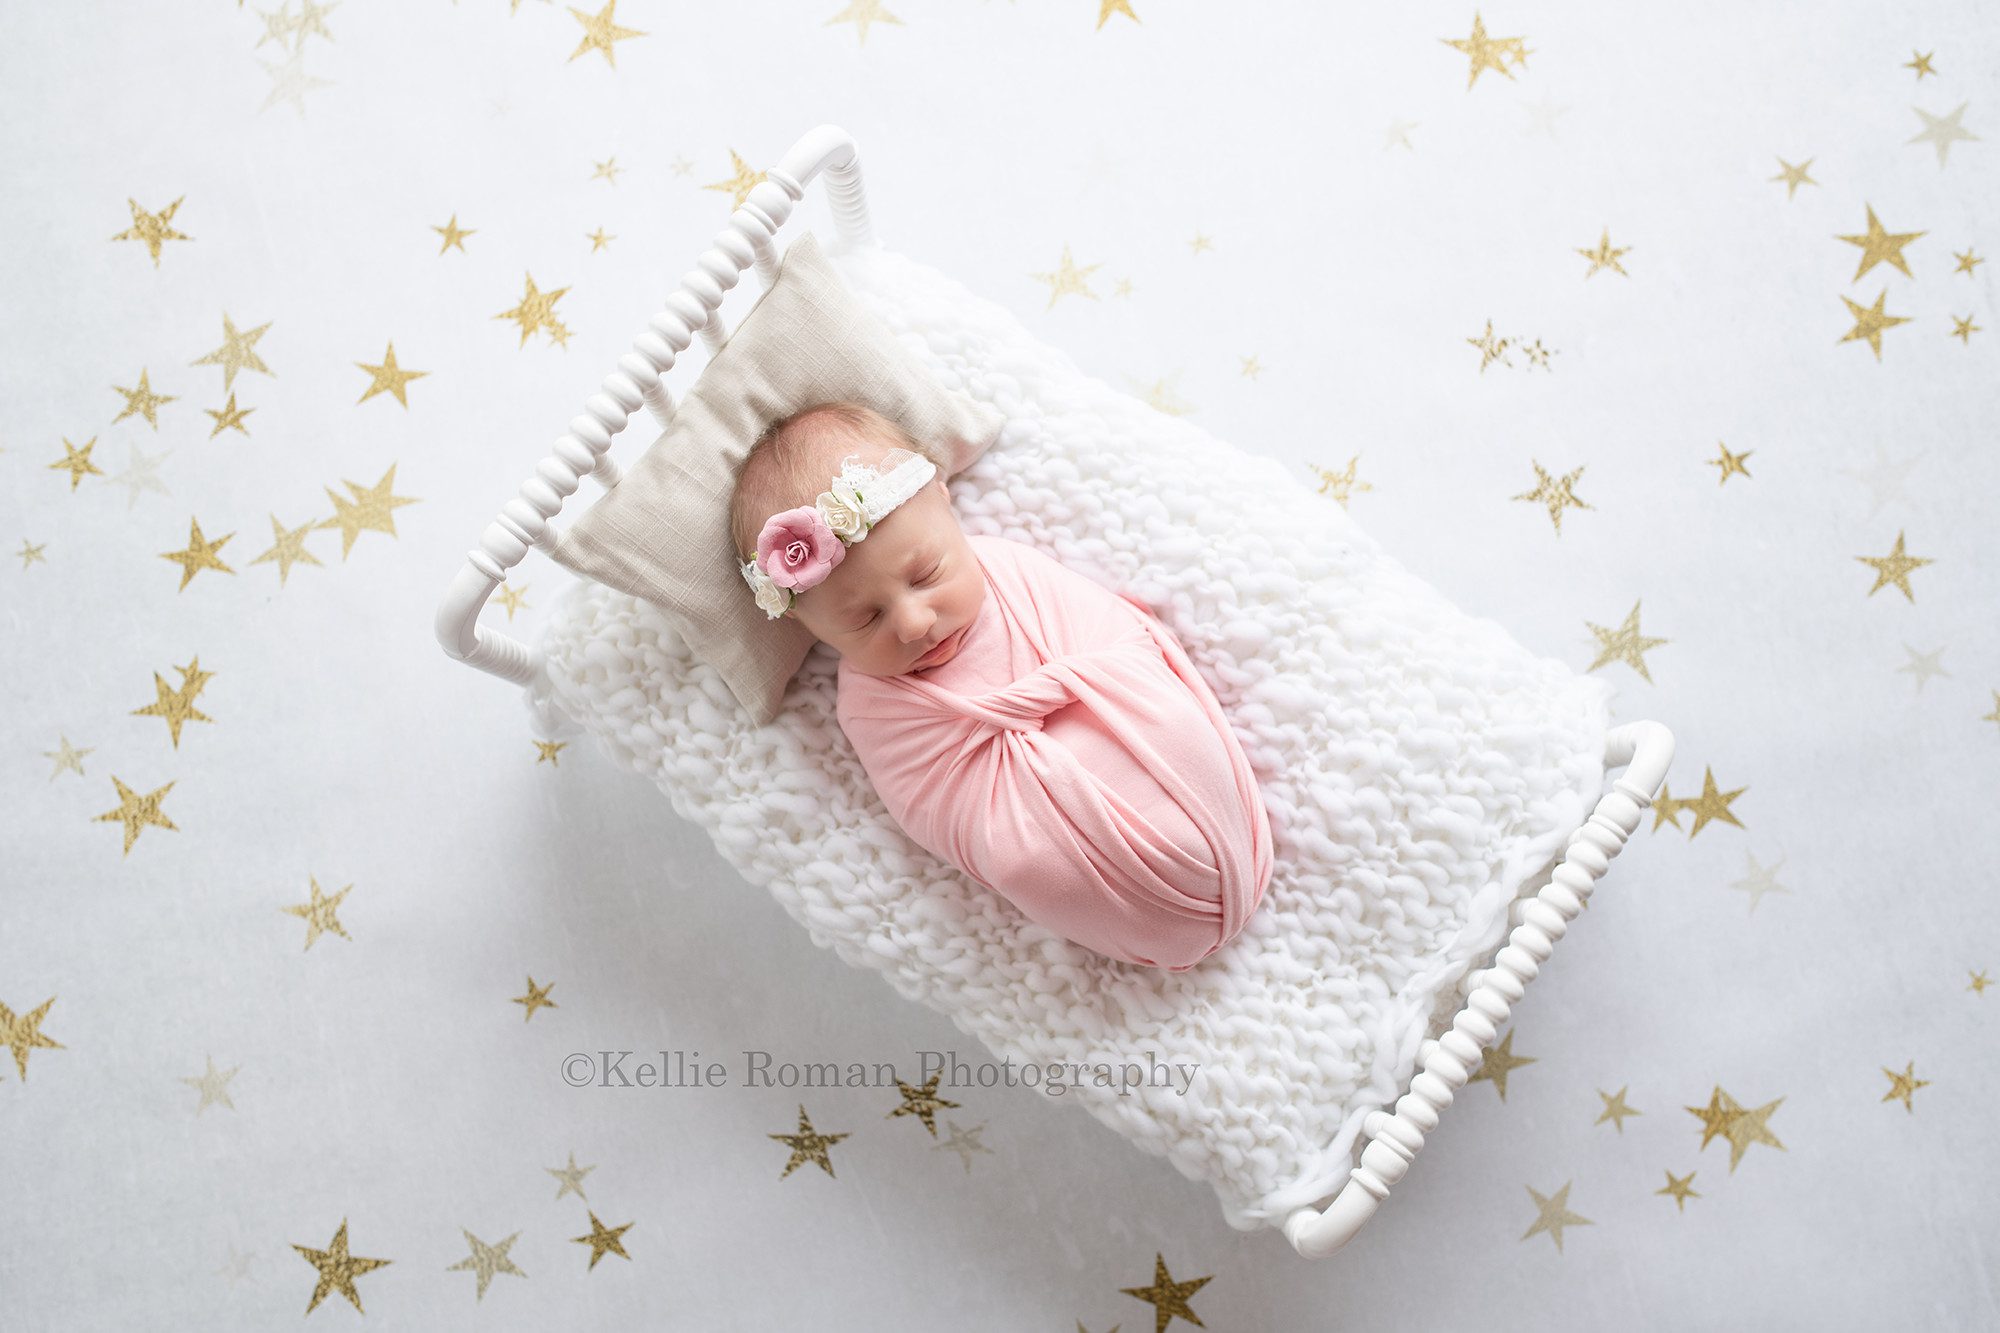 milwaukee baby whisperer a newborn baby girl is in a greendale Wisconsin photo studio. She is wrapped in a pink fabric and has a pink and white flower headband on. she is laying on a white little bed with white knitted fabric on it. her head is resting on a pillow. the best is on top of a white backdrop with gold stars.